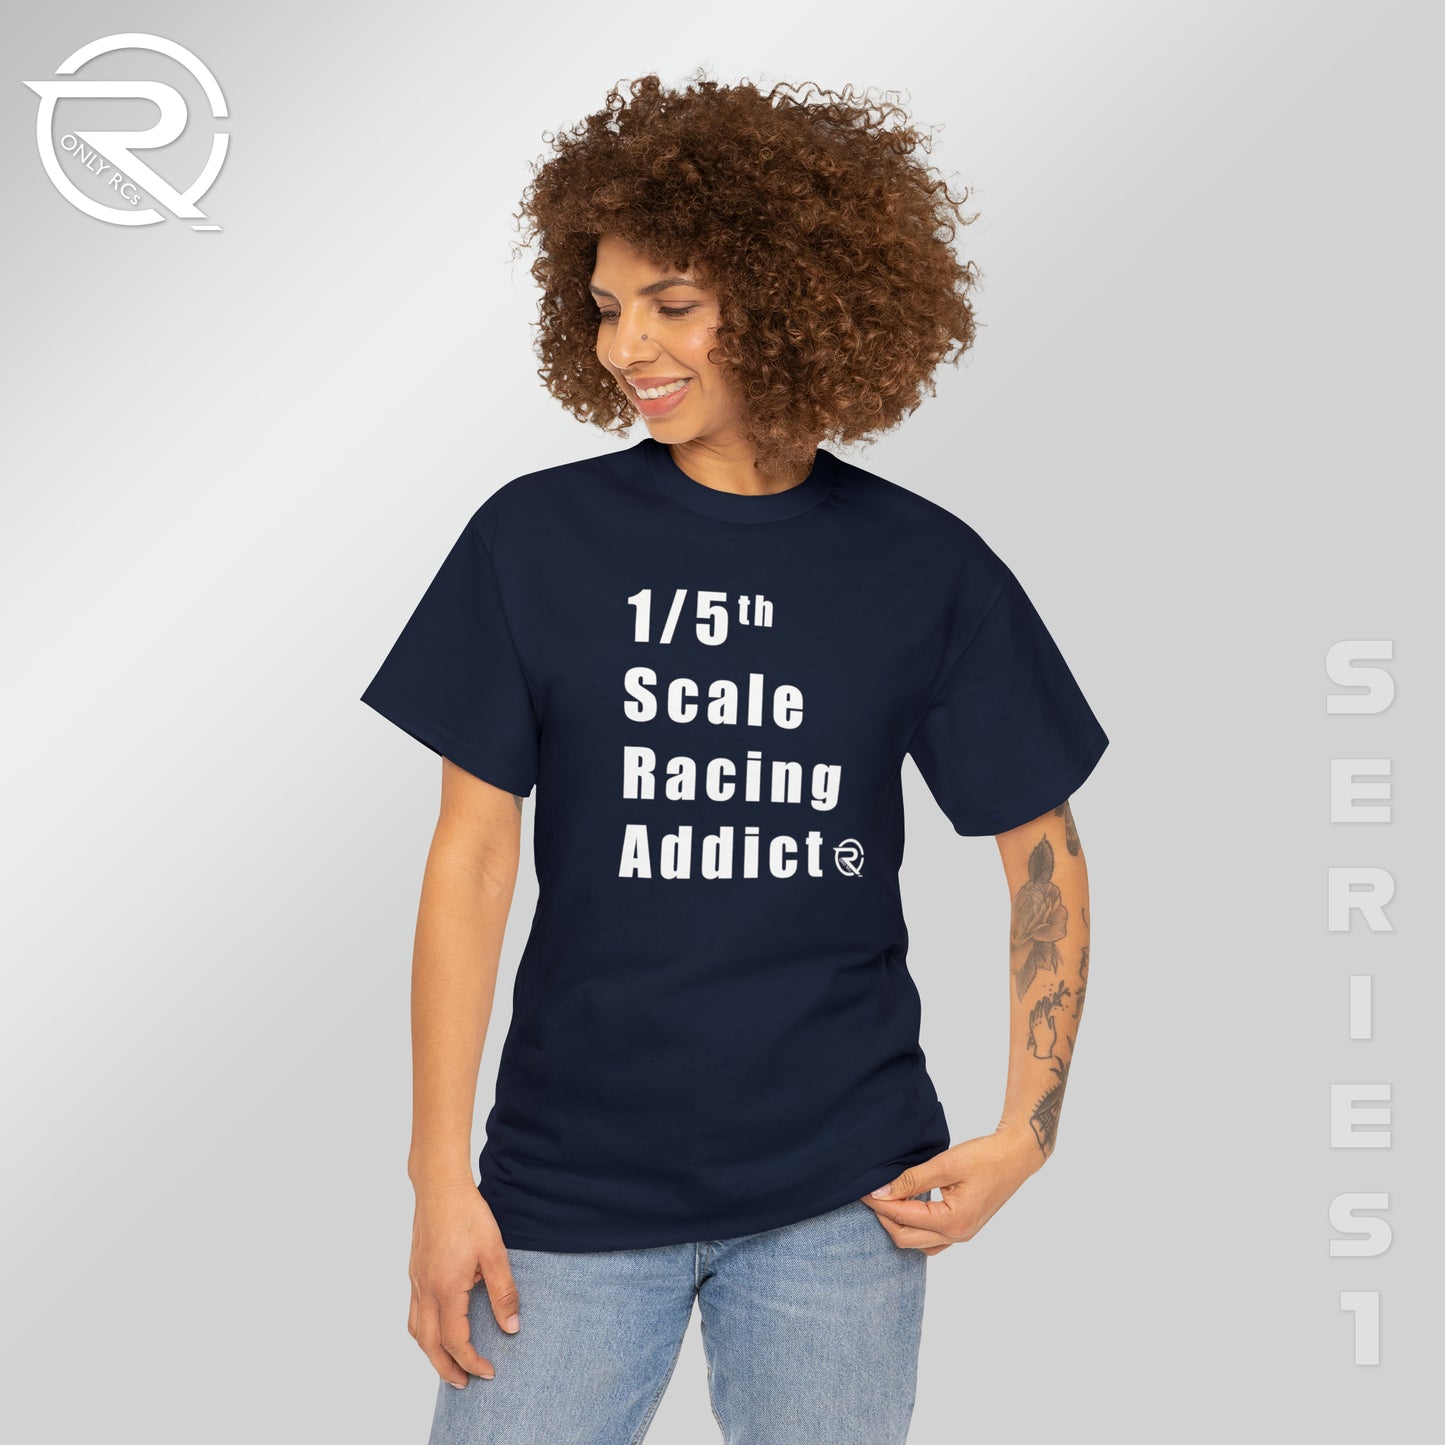 OnlyRCs - 1/5th Scale Racing Addict Heavy Cotton Tee - Series 1